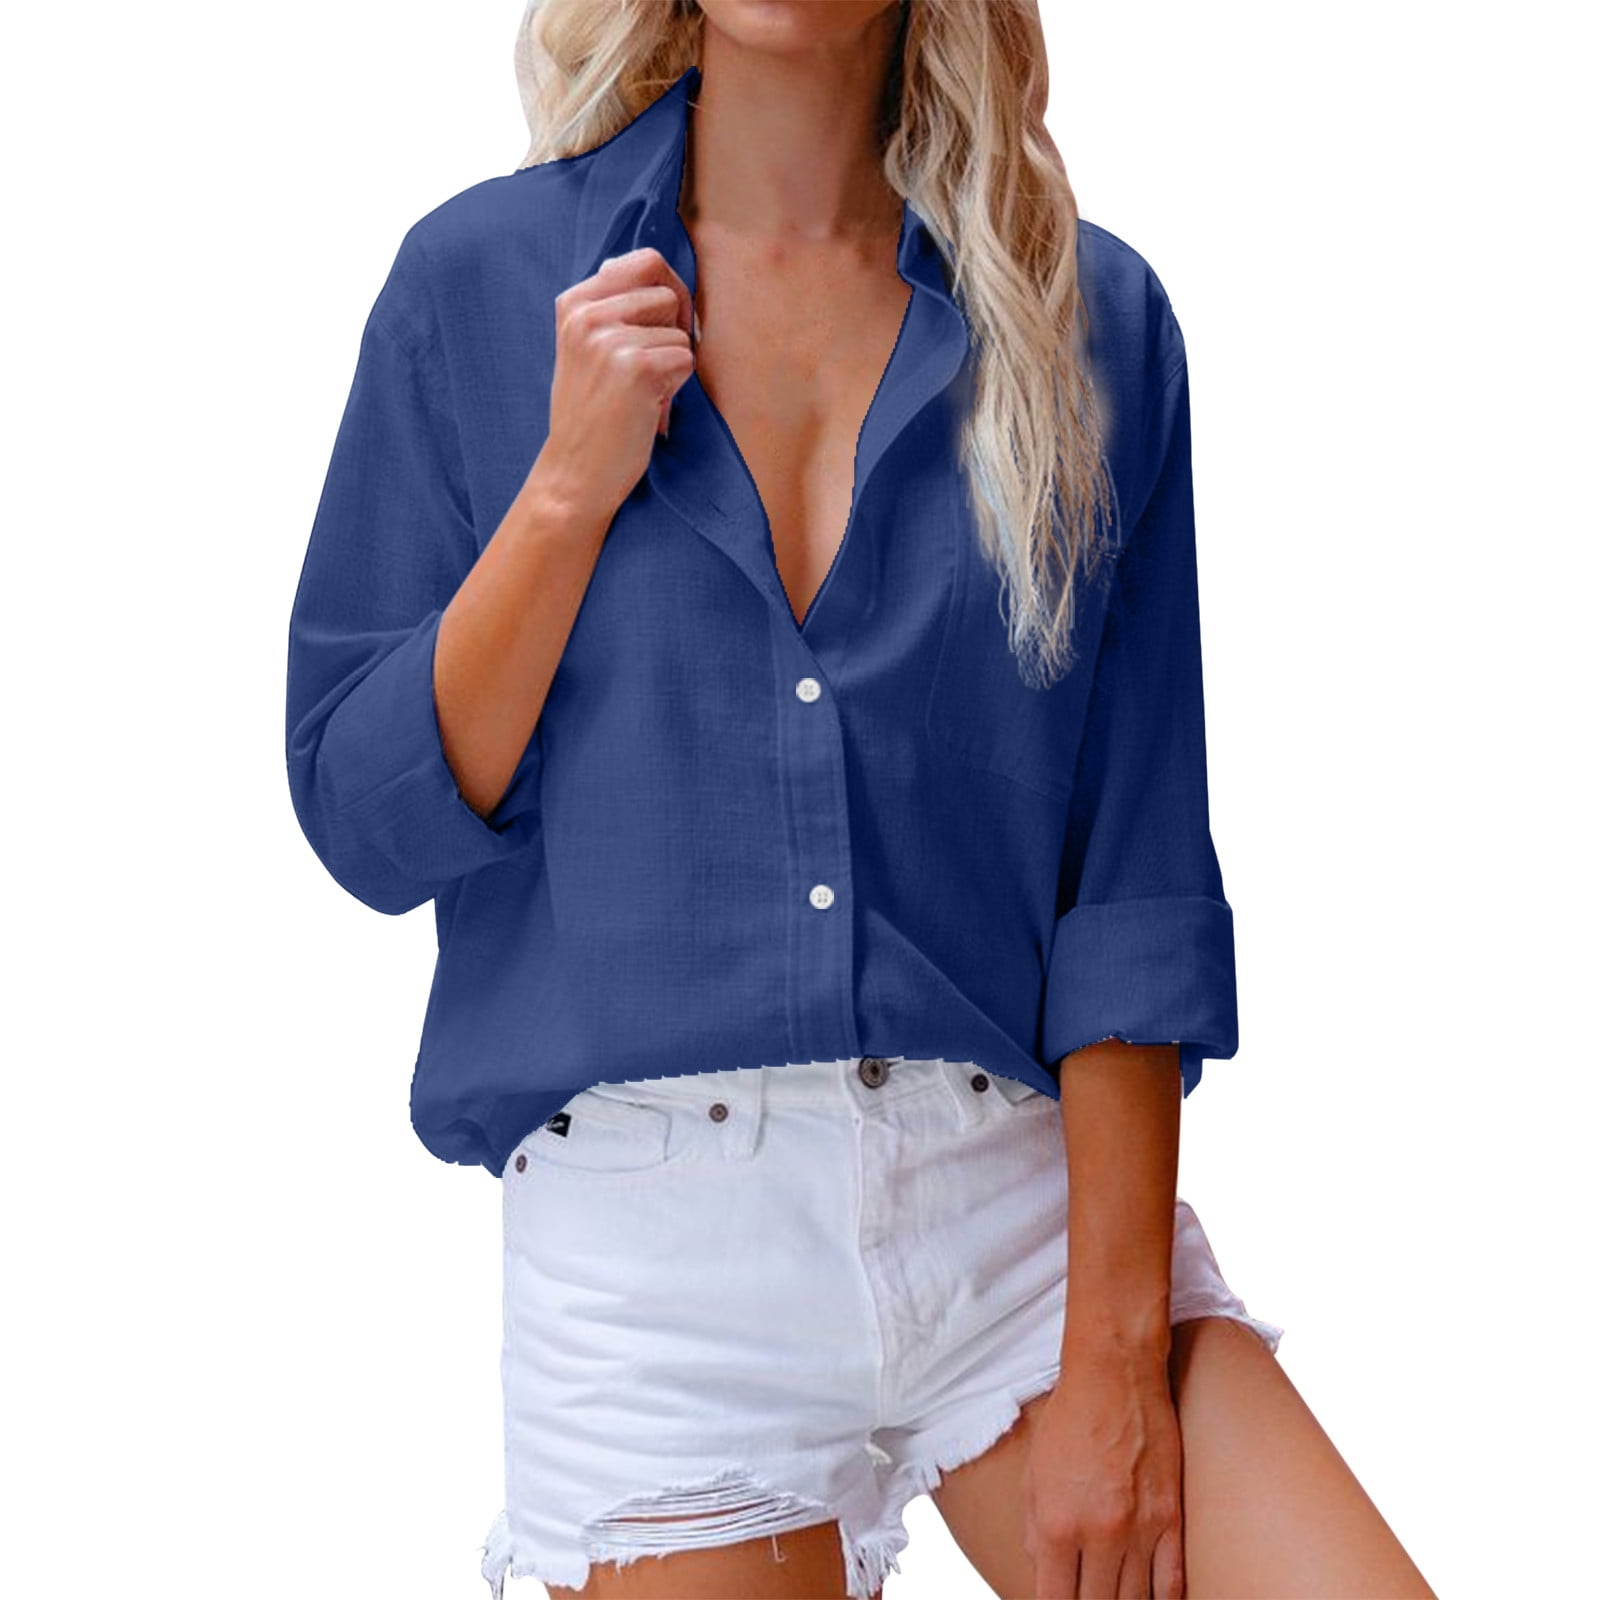 Hsmqhjwe Same Day Delivery Items Prime Clothes Cotton Spandex Long Sleeve Women's TopL-4XL Size O-Neck Shirts Blouse Plus Flowy Summer Tunic Short